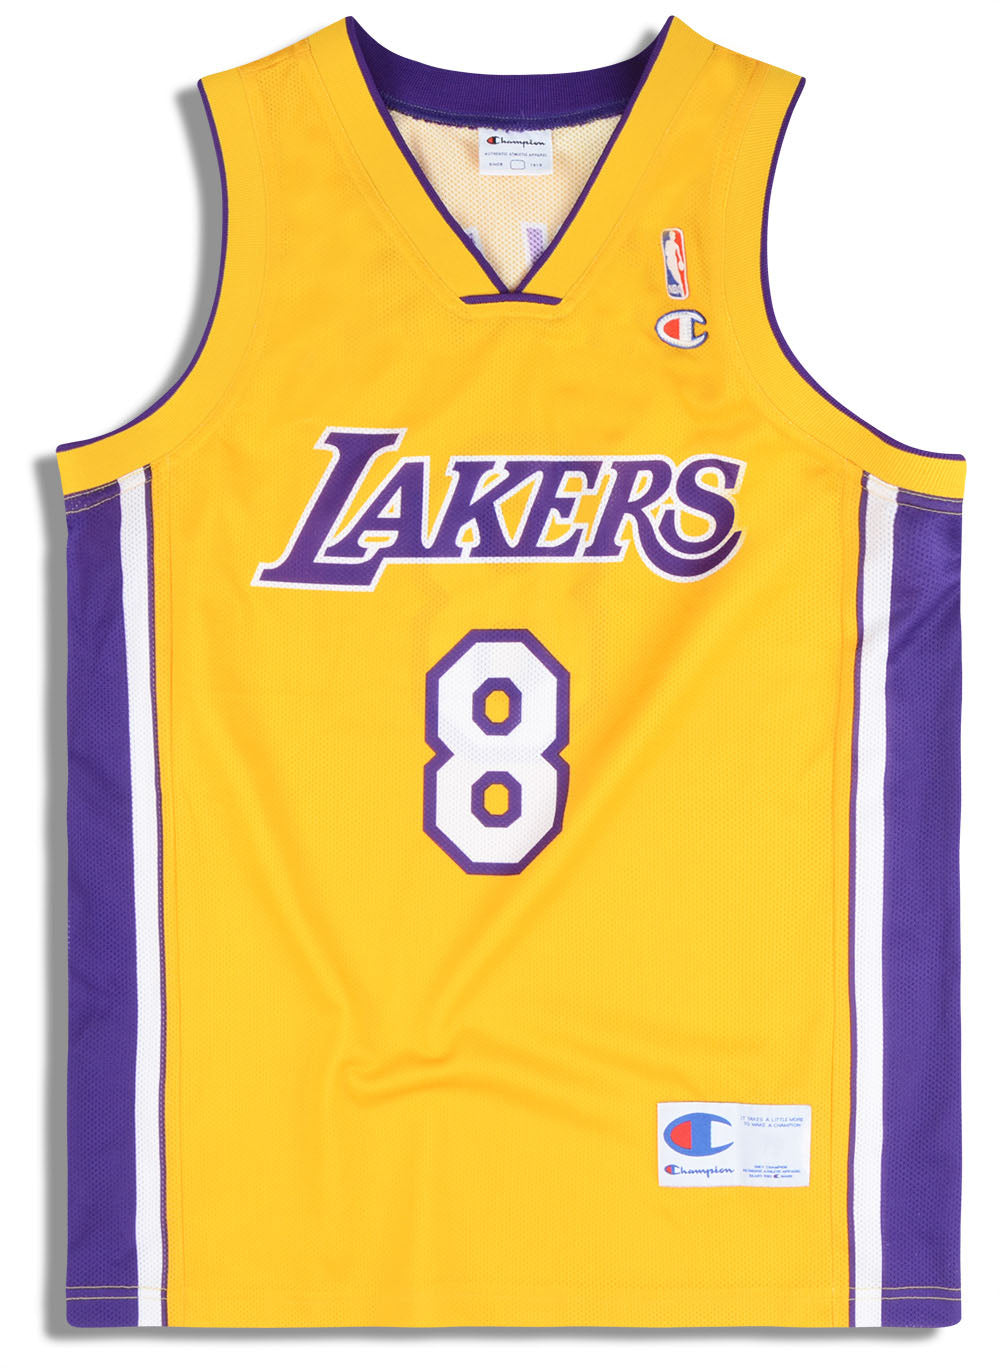 Kobe's Official LA Lakers Jersey, 2000 - Signed by the Players